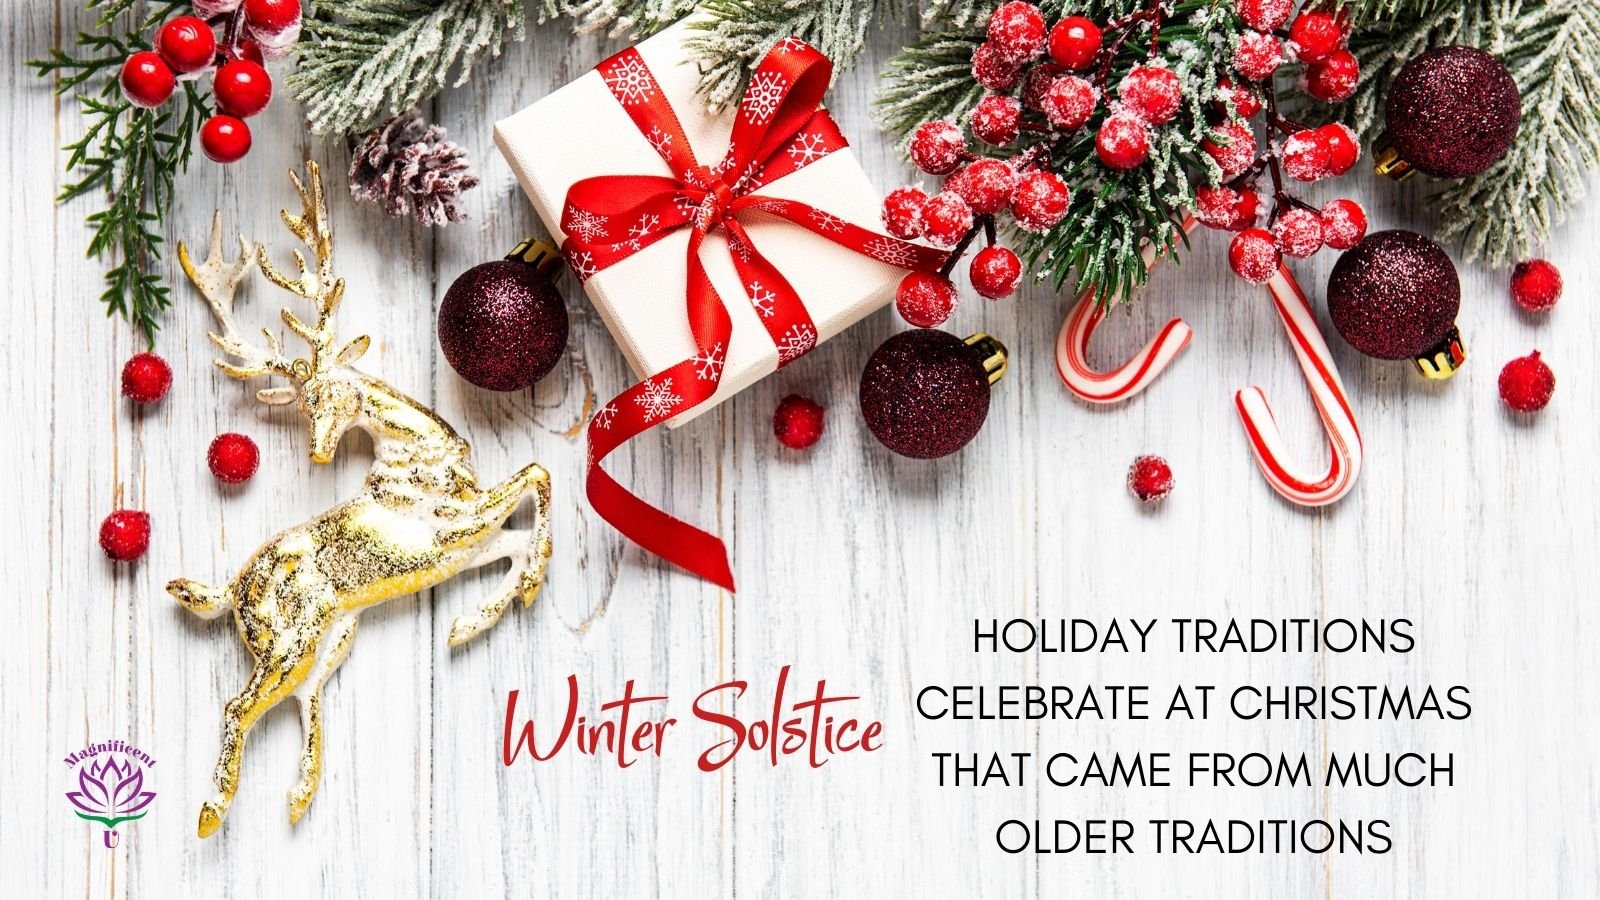 Winter Solstice Christmas Holiday Traditions and their Pagan Roots